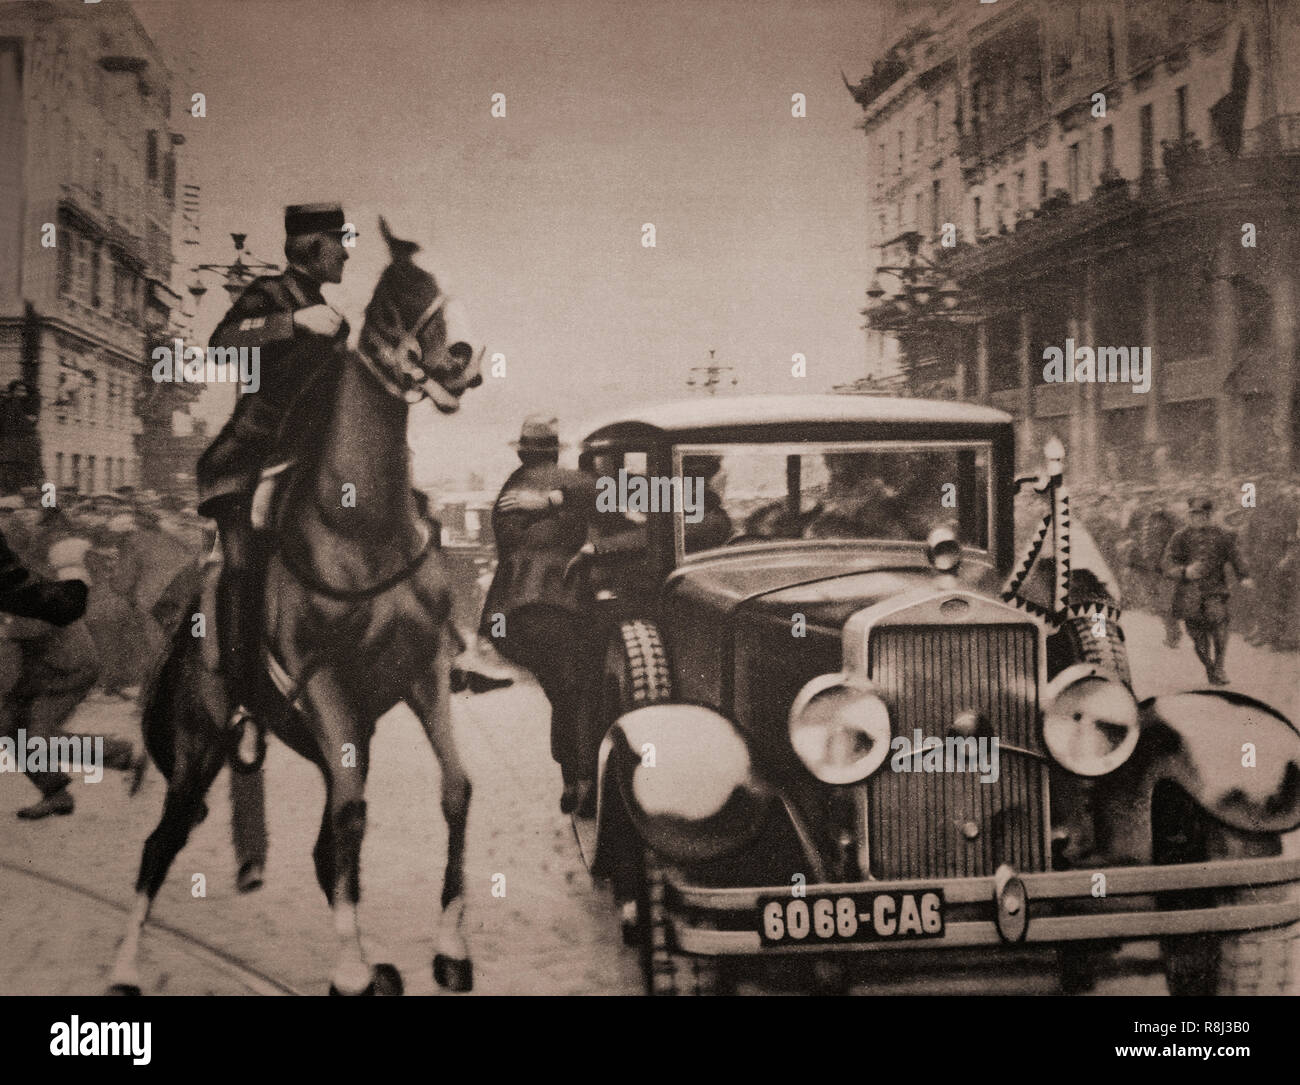 The assassination of Alexander I, aka Alexander the Unifier on 9 October 1934 who became King of Yugoslavia from 1921 to 1934 (prior to 1929 the state was known as the Kingdom of Serbs, Croats and Slovenes). He was assassinated in Marseille, France while being slowly driven through the streets along with French Foreign Minister Louis Barthou by the Bulgarian terrorist Vlado Chernozemski, of the pro-Bulgarian Internal Macedonian Revolutionary Organization (IMRO). He stepped from the street and shot and killed the King. Stock Photo